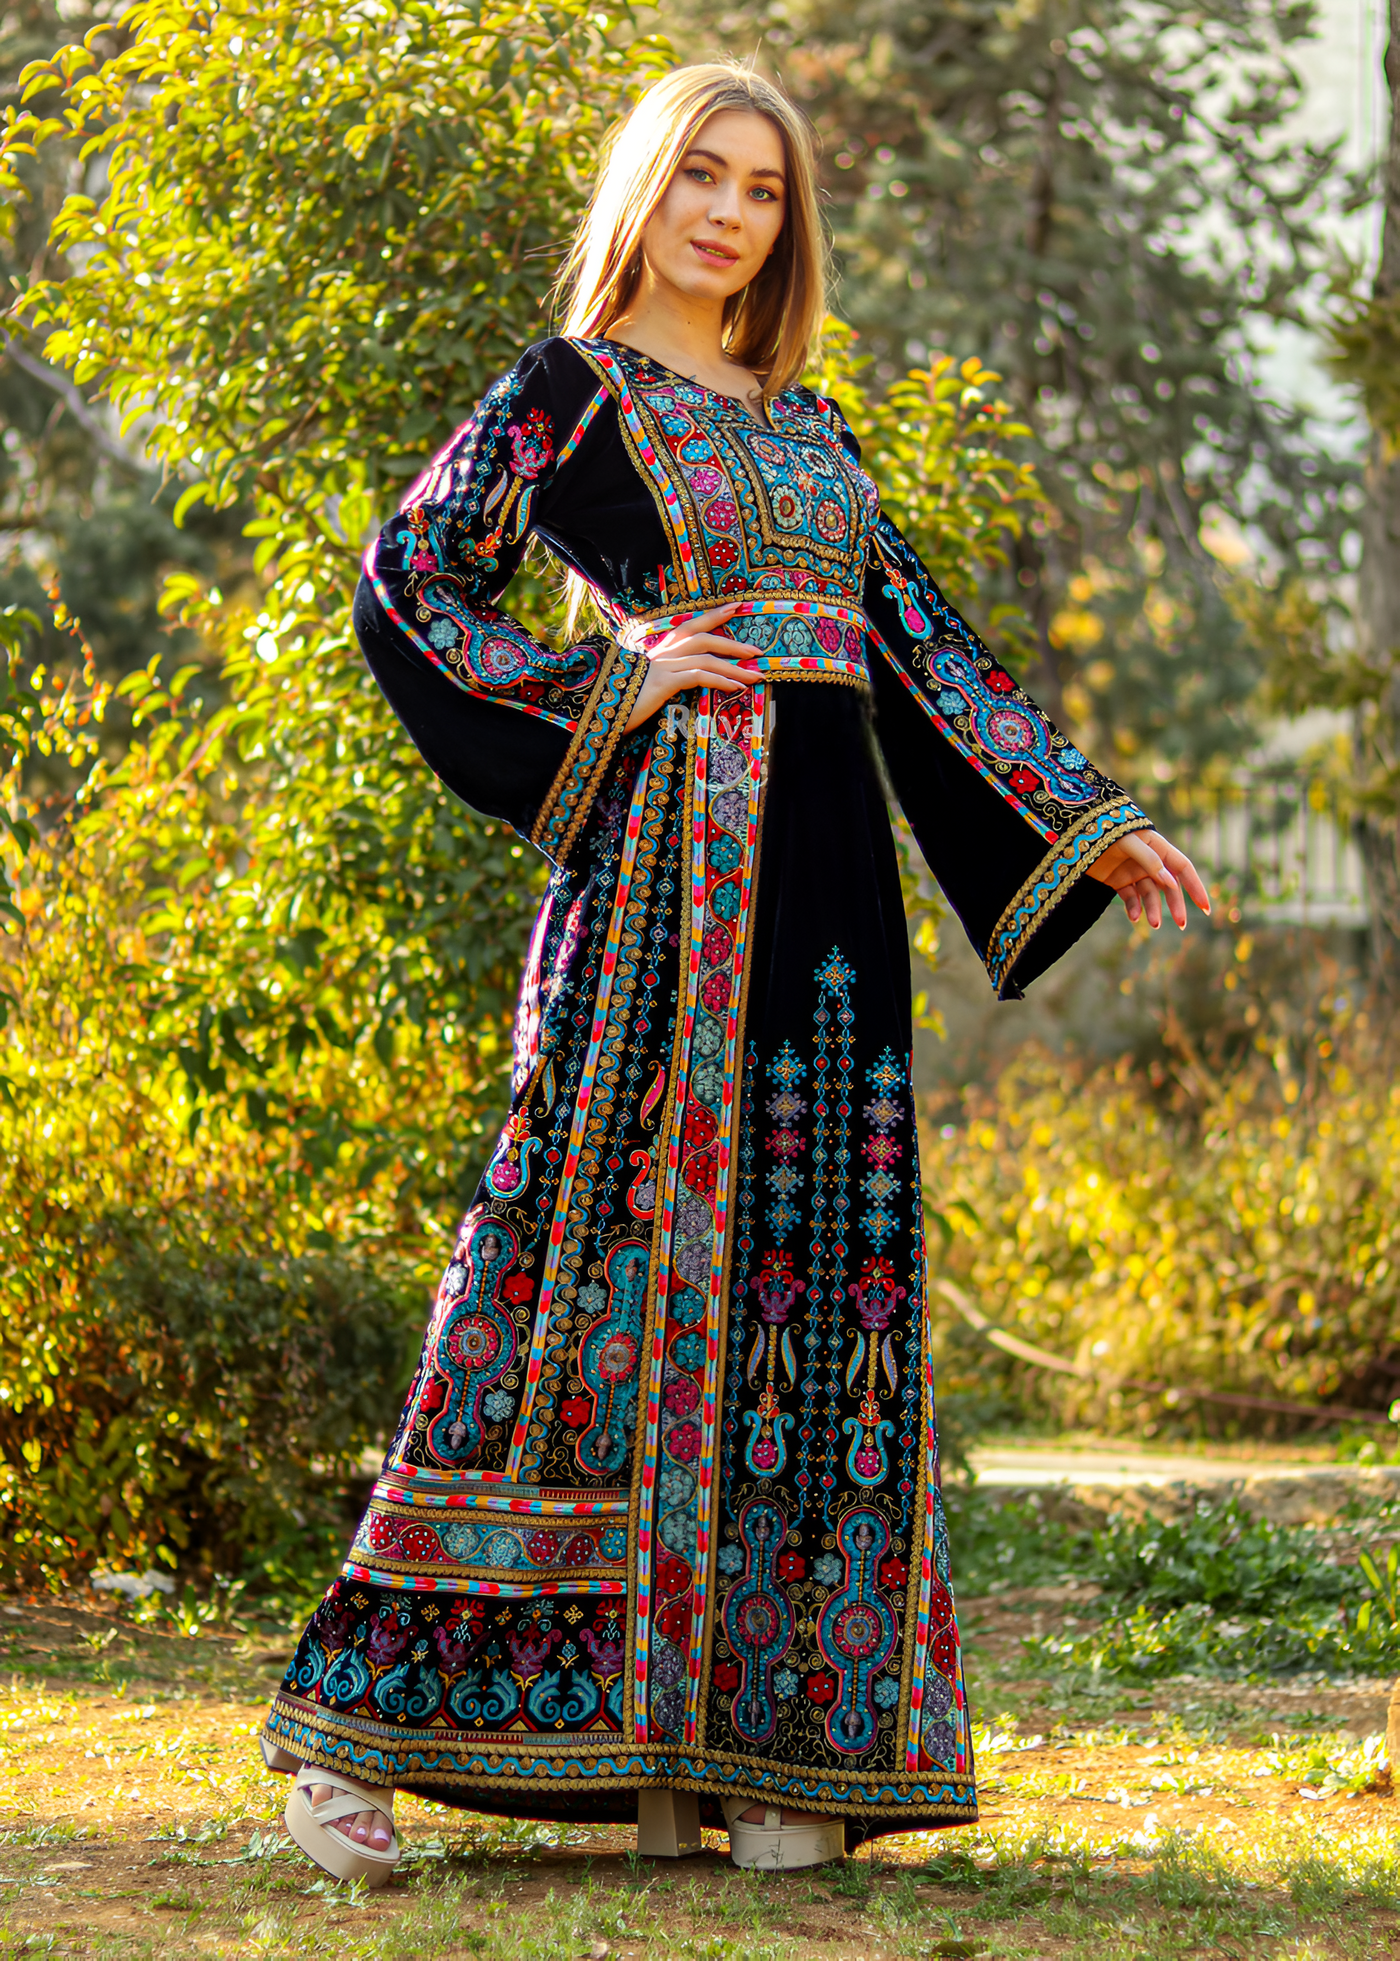 Majestic Colorful Velvet Thobe - Very High Quality Embroidered Palestinian style Thobe